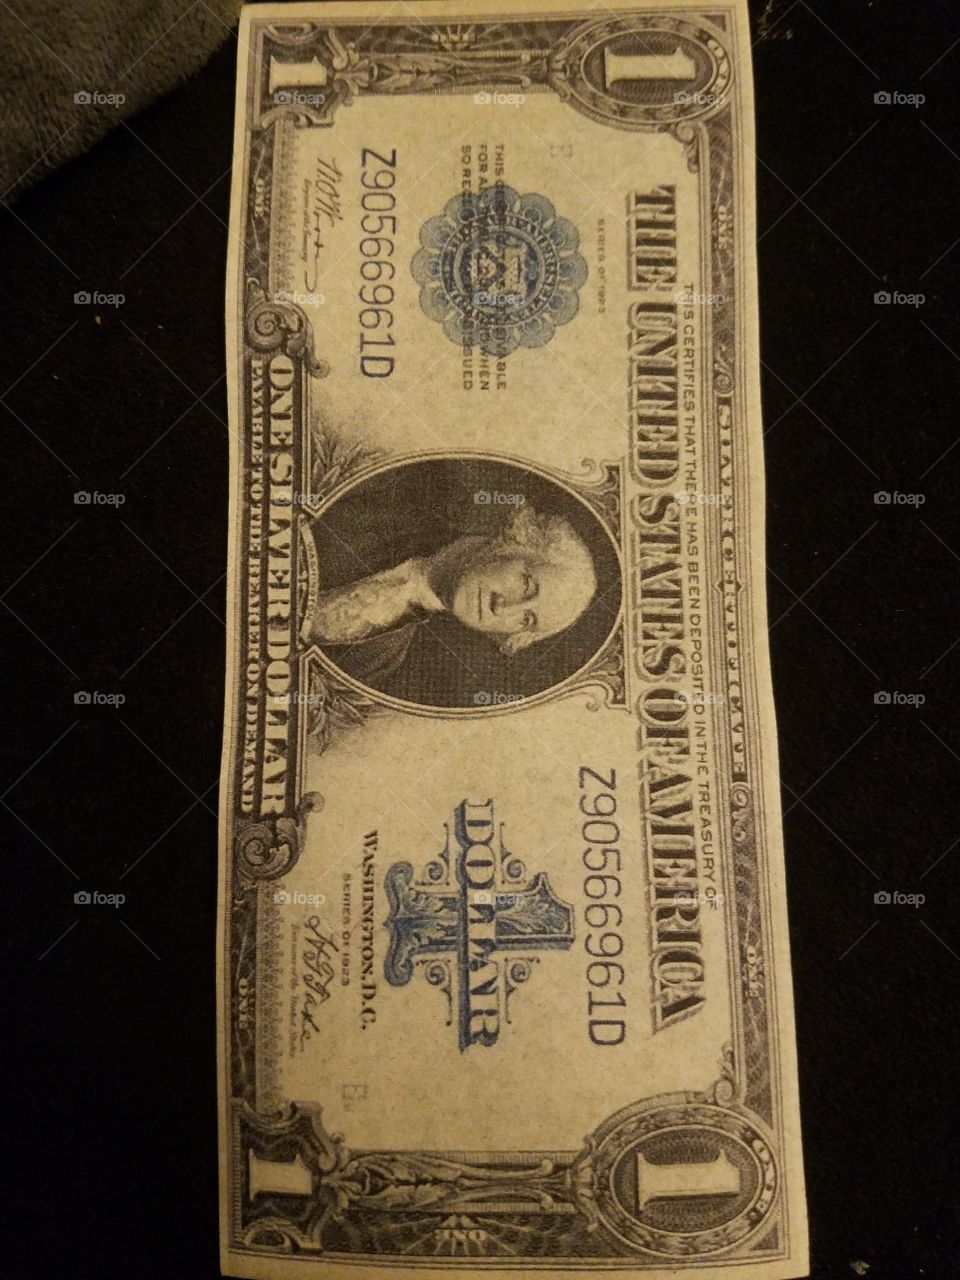 The single most common large size piece of United States currency is the 1923 $1 silver certificate.  These were issued by the millions.  Today a nice looking example can be purchased for around $20.  George Washington is shown at the center of each